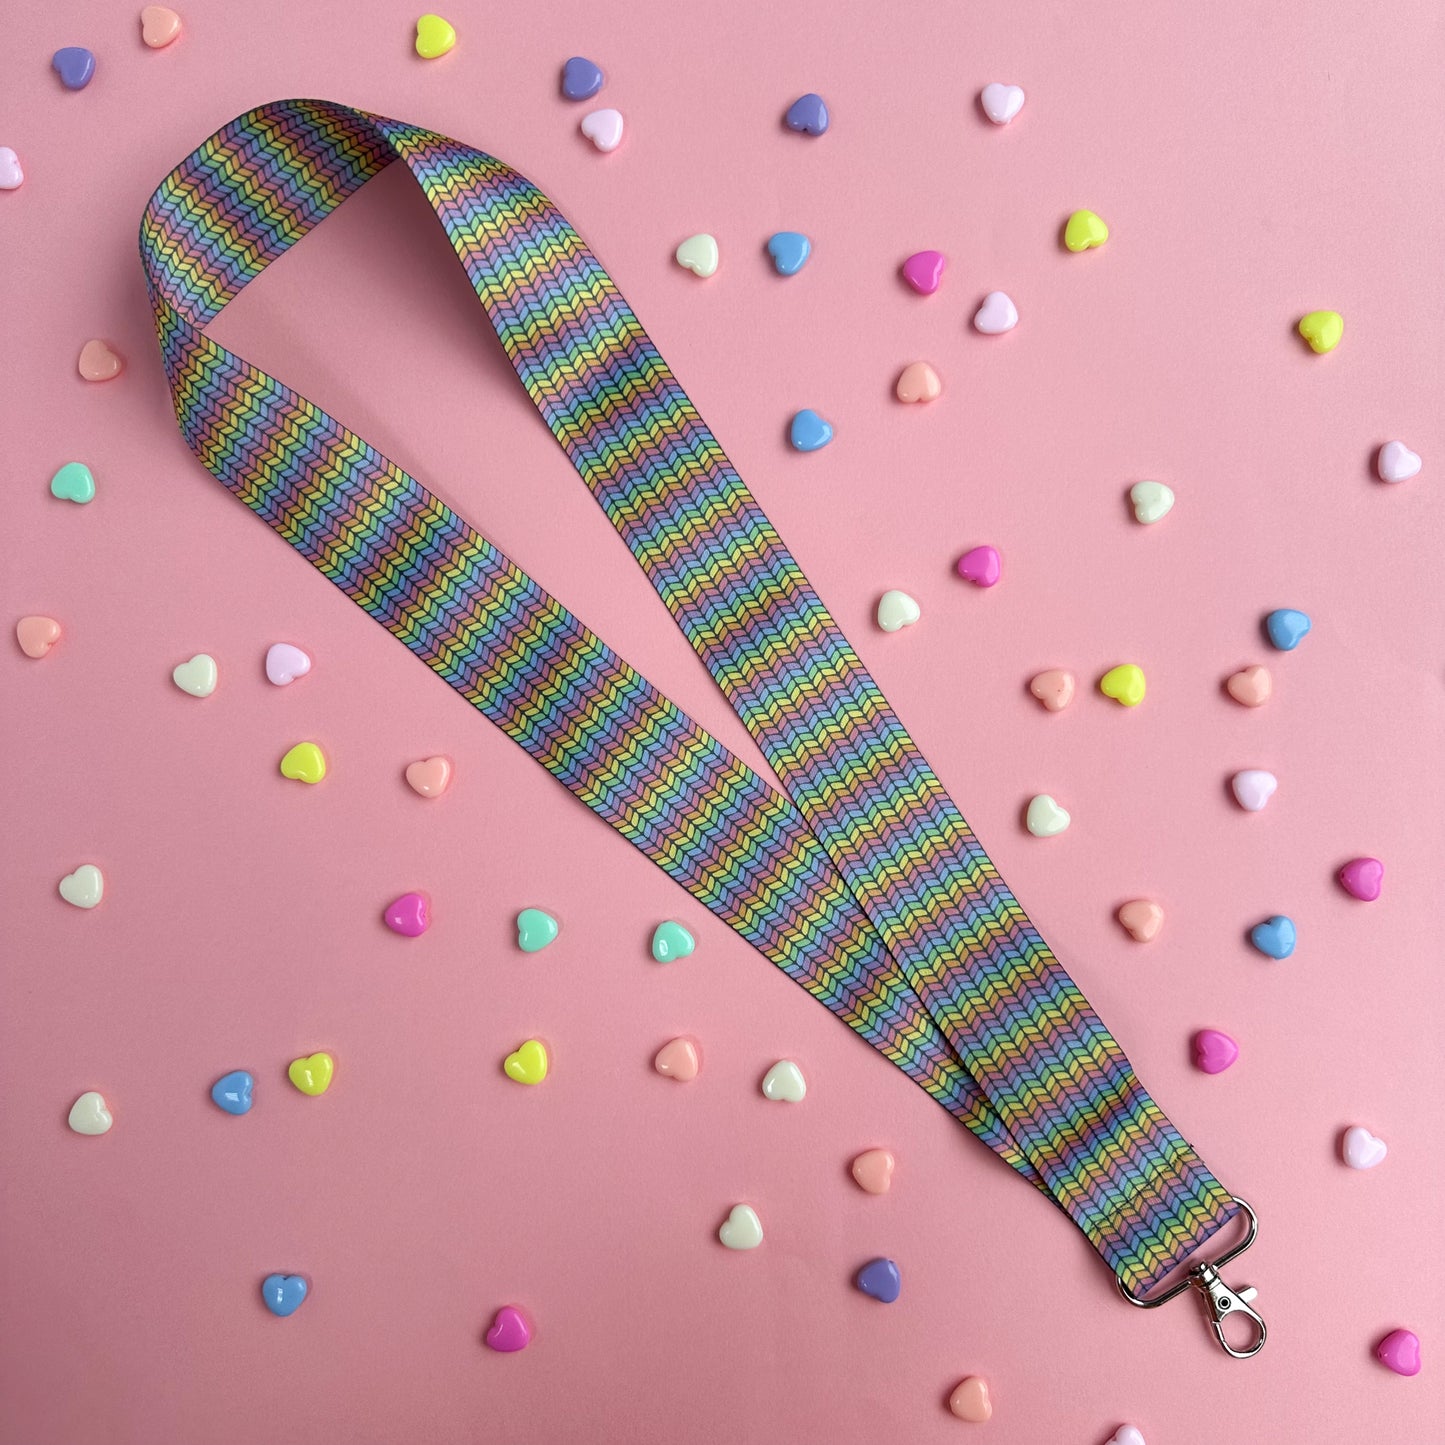 A woven lanyard with a pastel rainbow stockinette stitch graphic printed on it with a silver metal lobster claw clasp at the bottom. This is a further out image showing the entire length of the lanyard on a pastel pink background with pastel colored hearts scattered around it. 